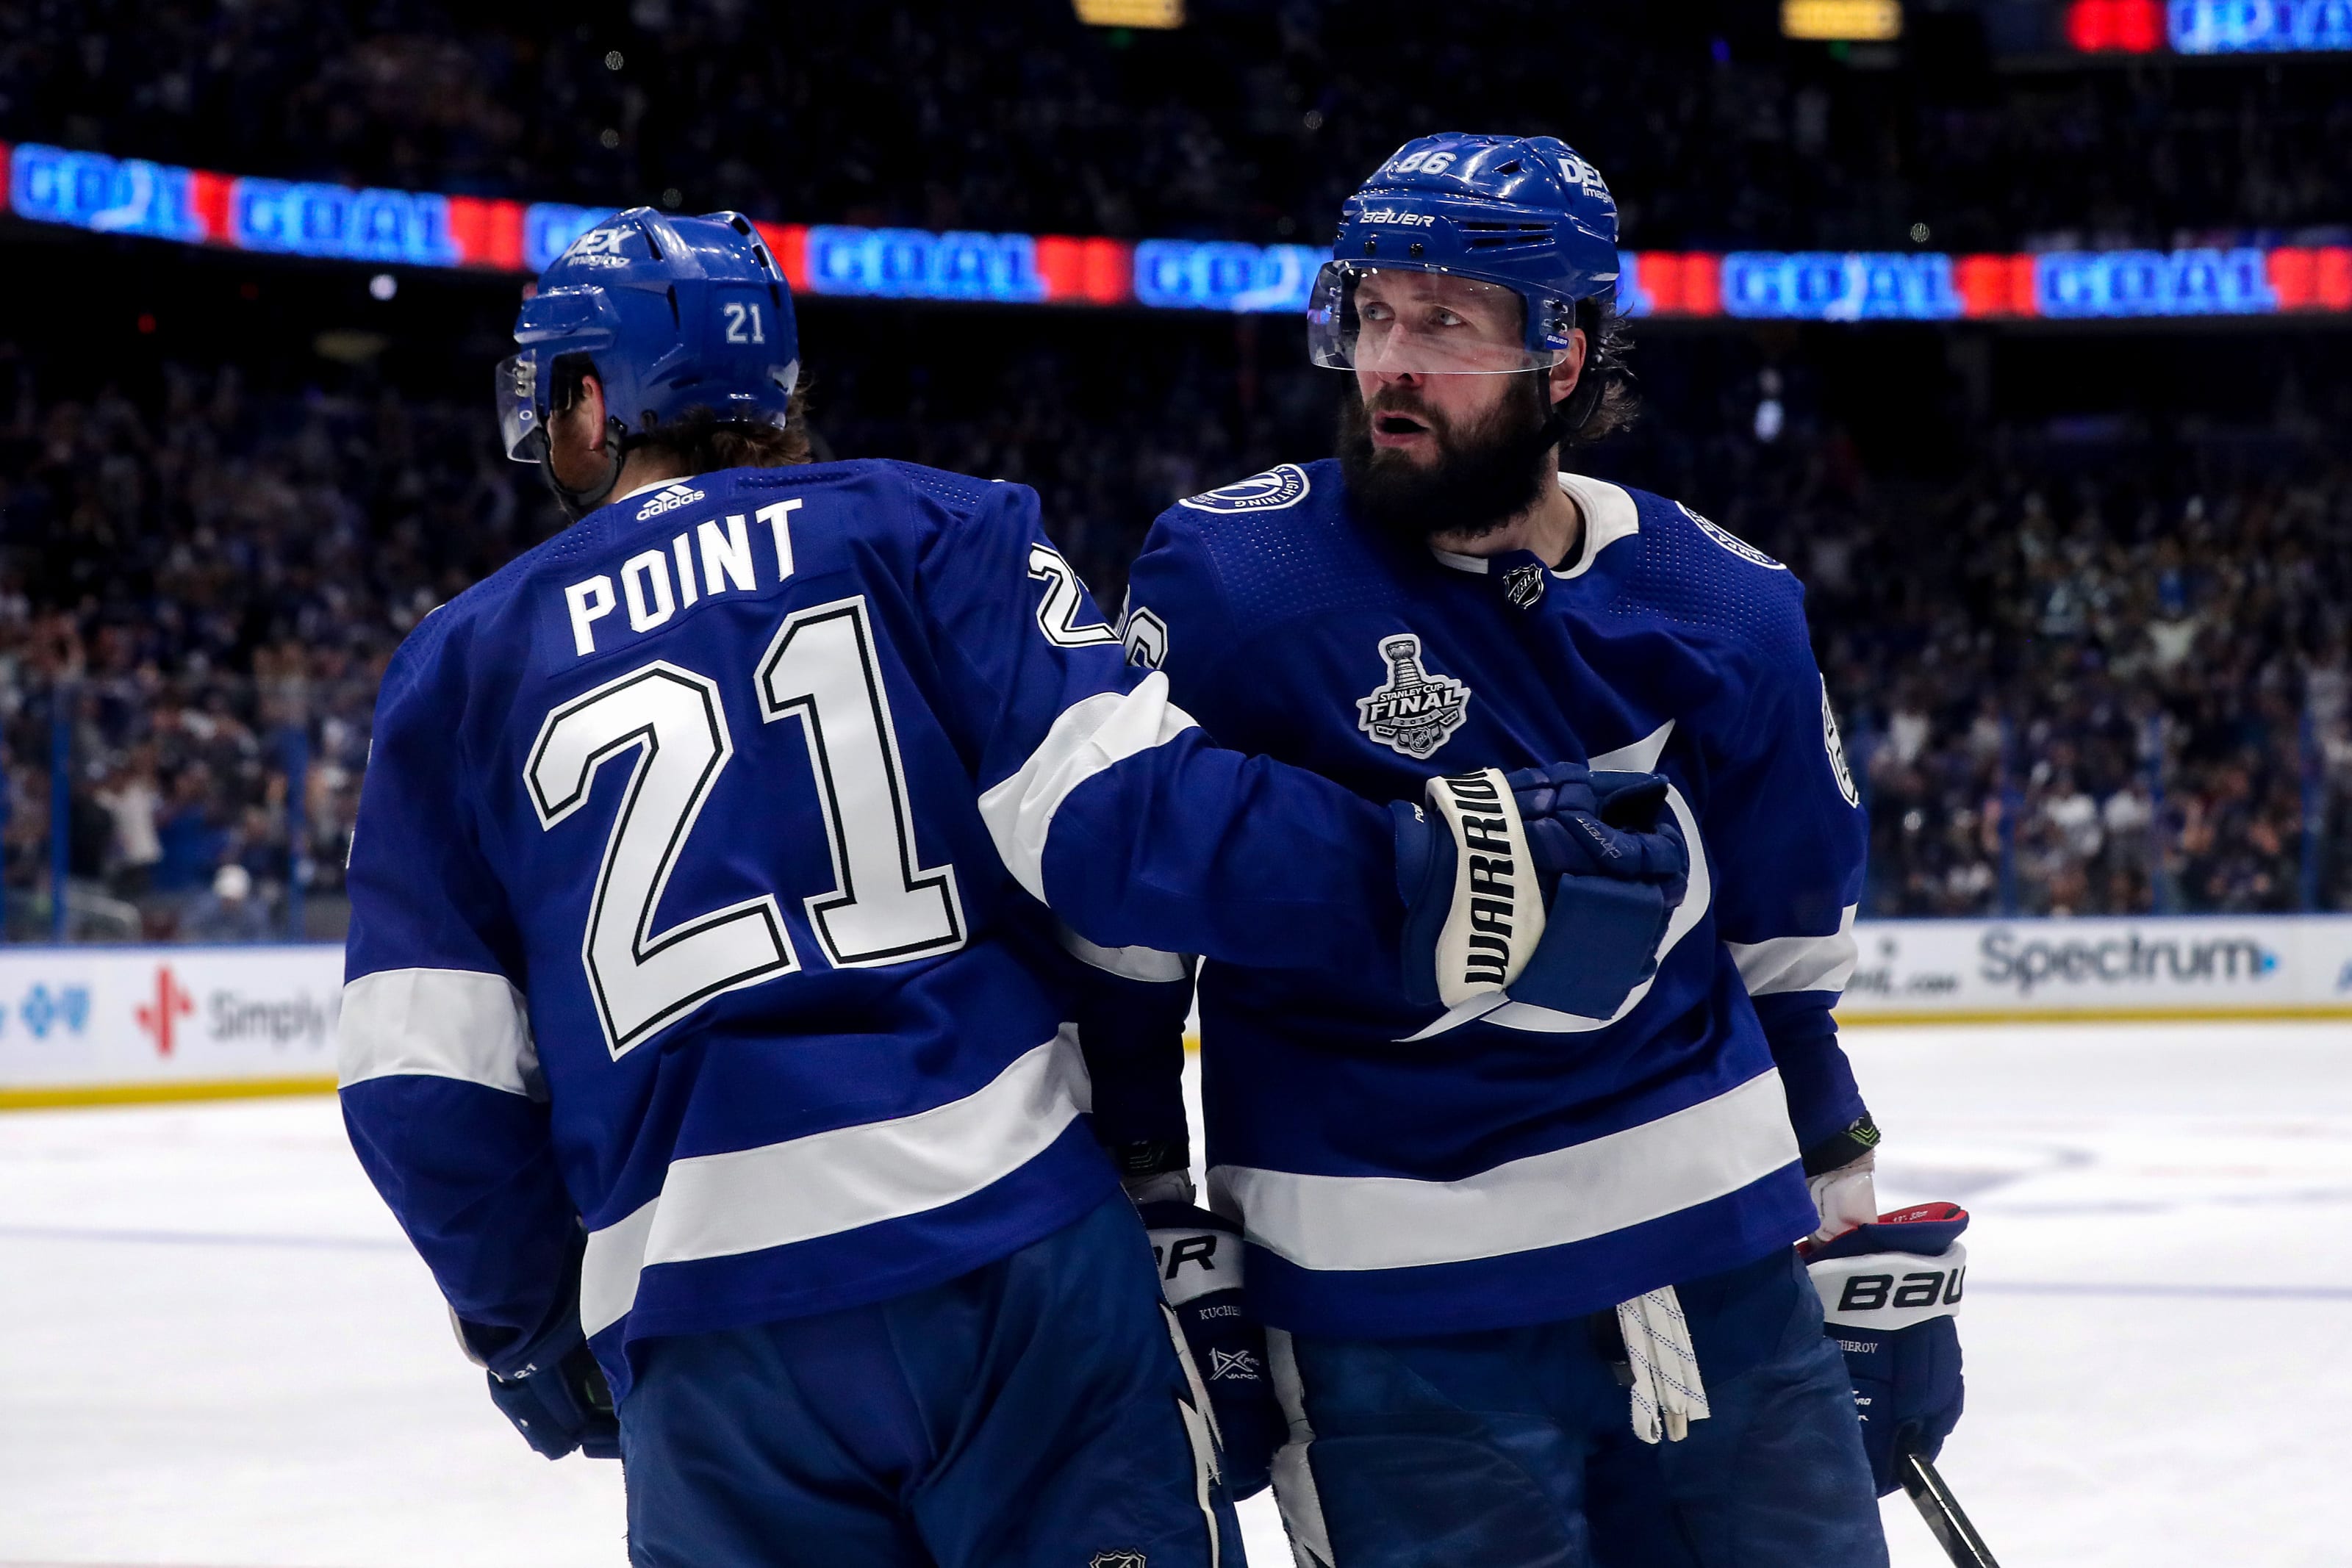 Lightning's Alex Killorn out for Game 2 of Stanley Cup Final - NBC